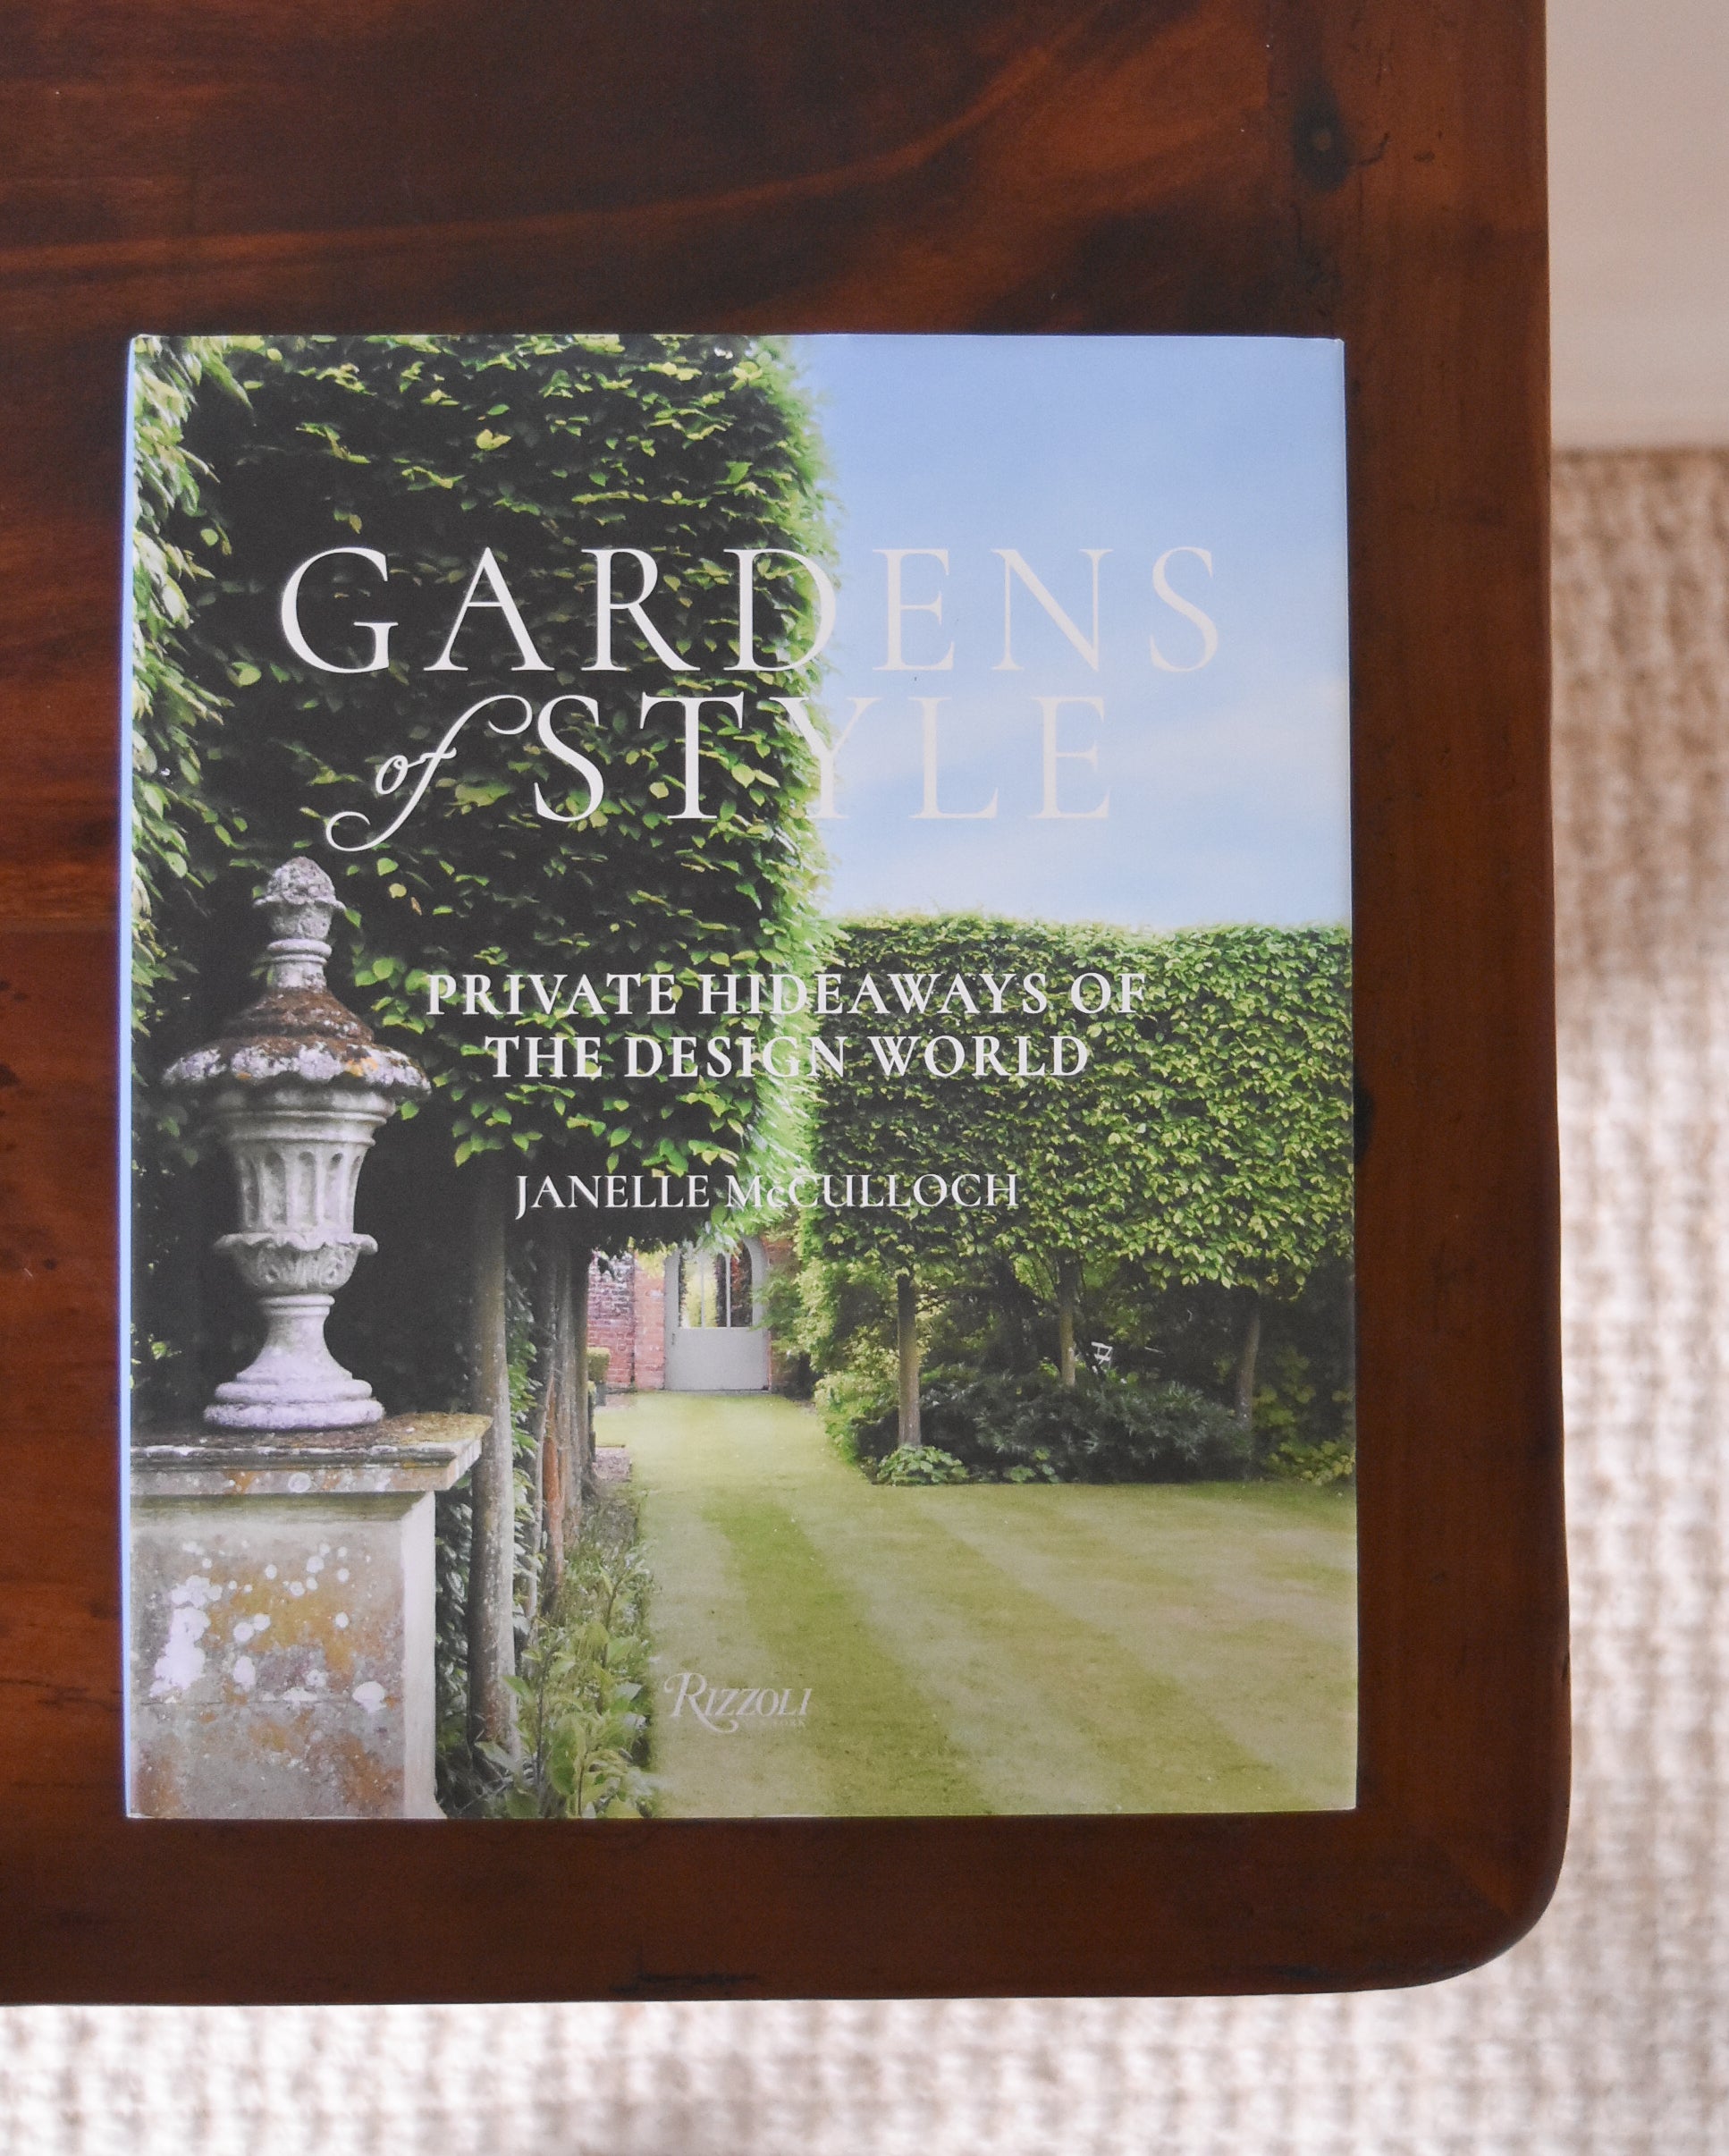 Gardens of Style by Janelle McCulloch